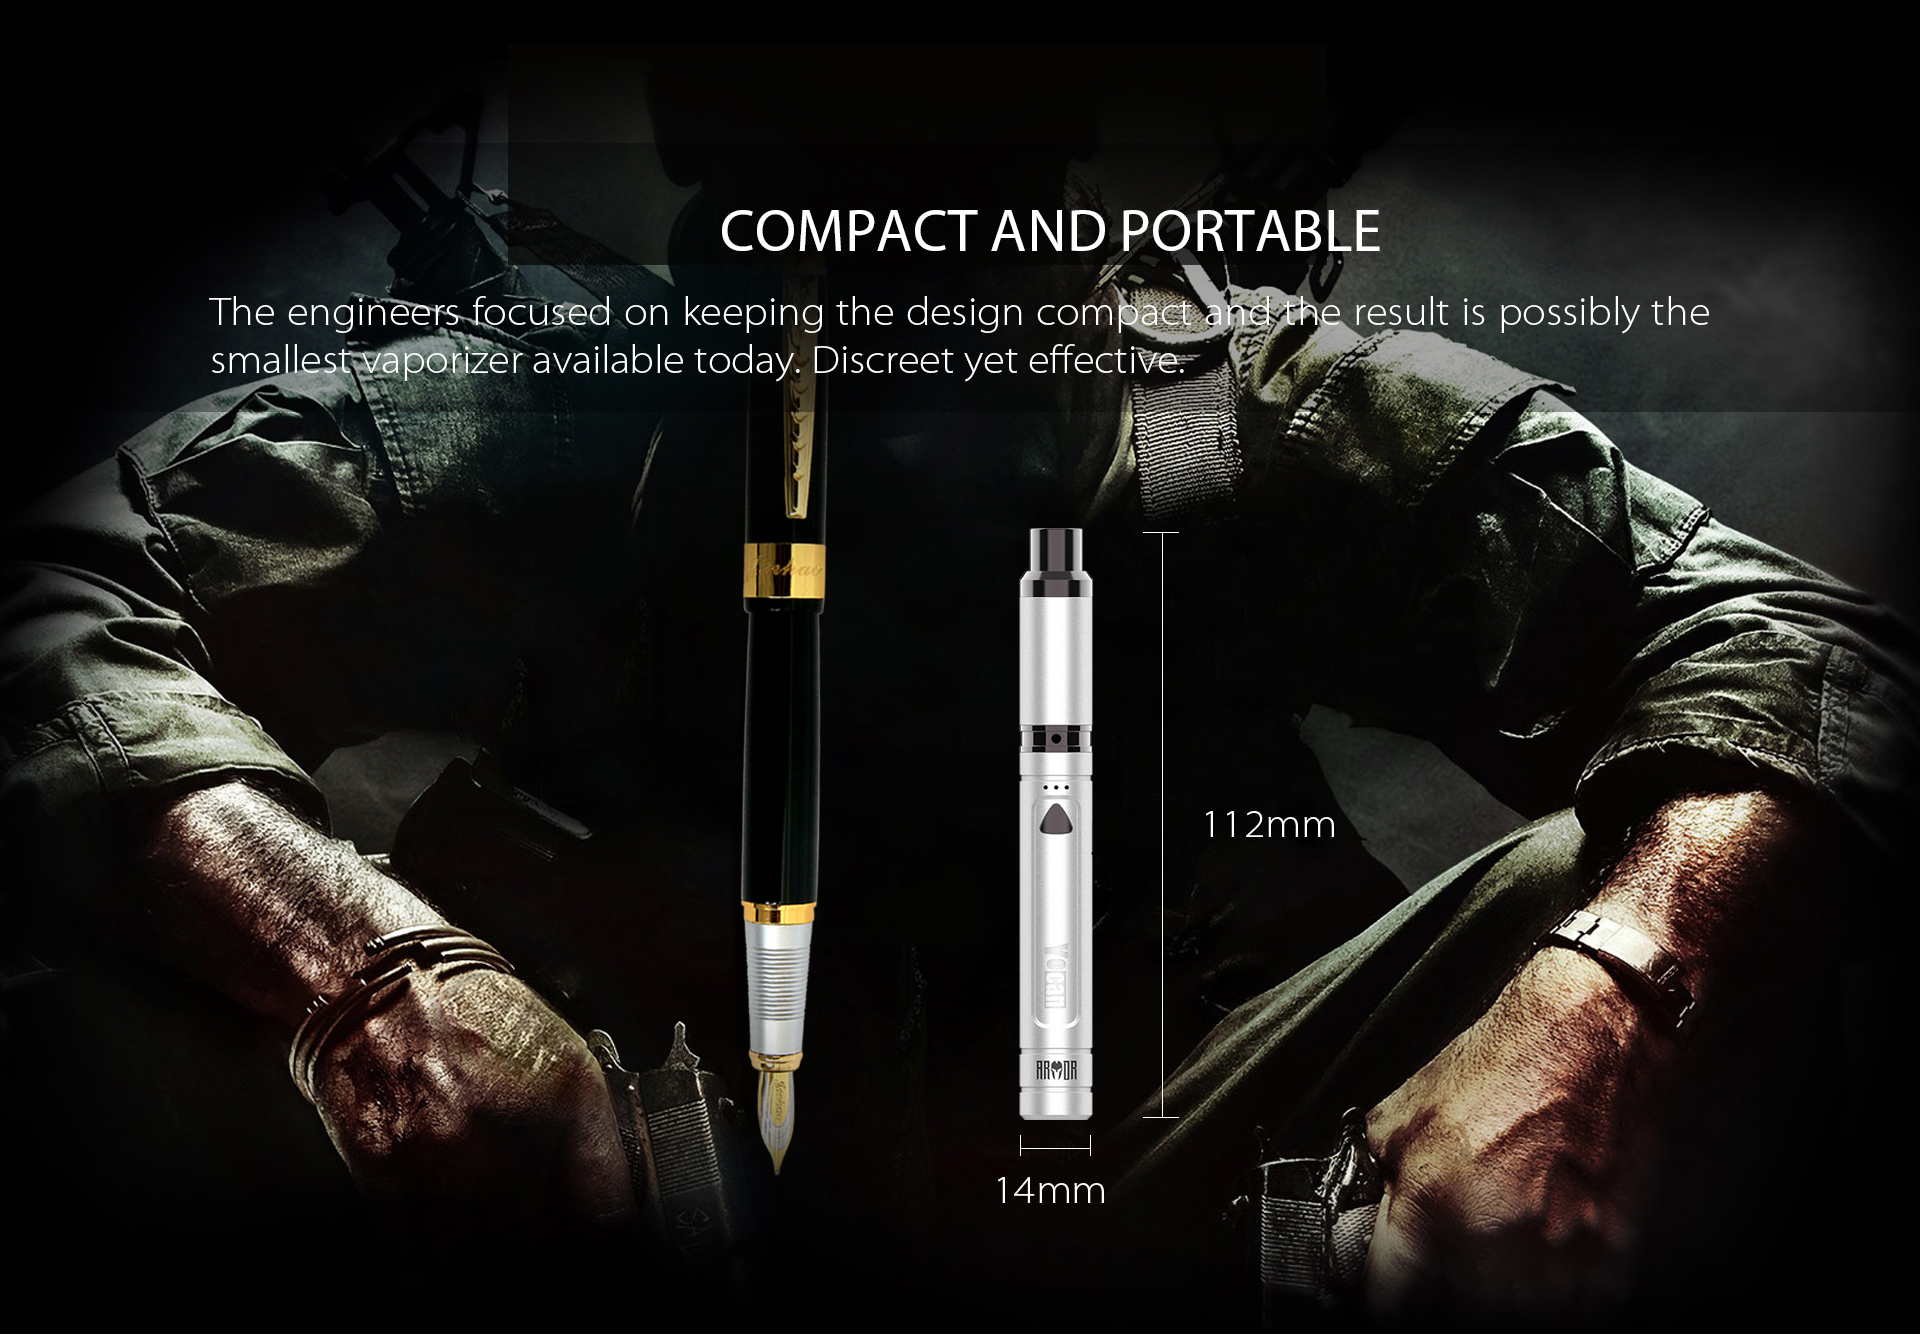 Yocan Armor Vaporizer pen is possibly the smallest vaporizer available today.